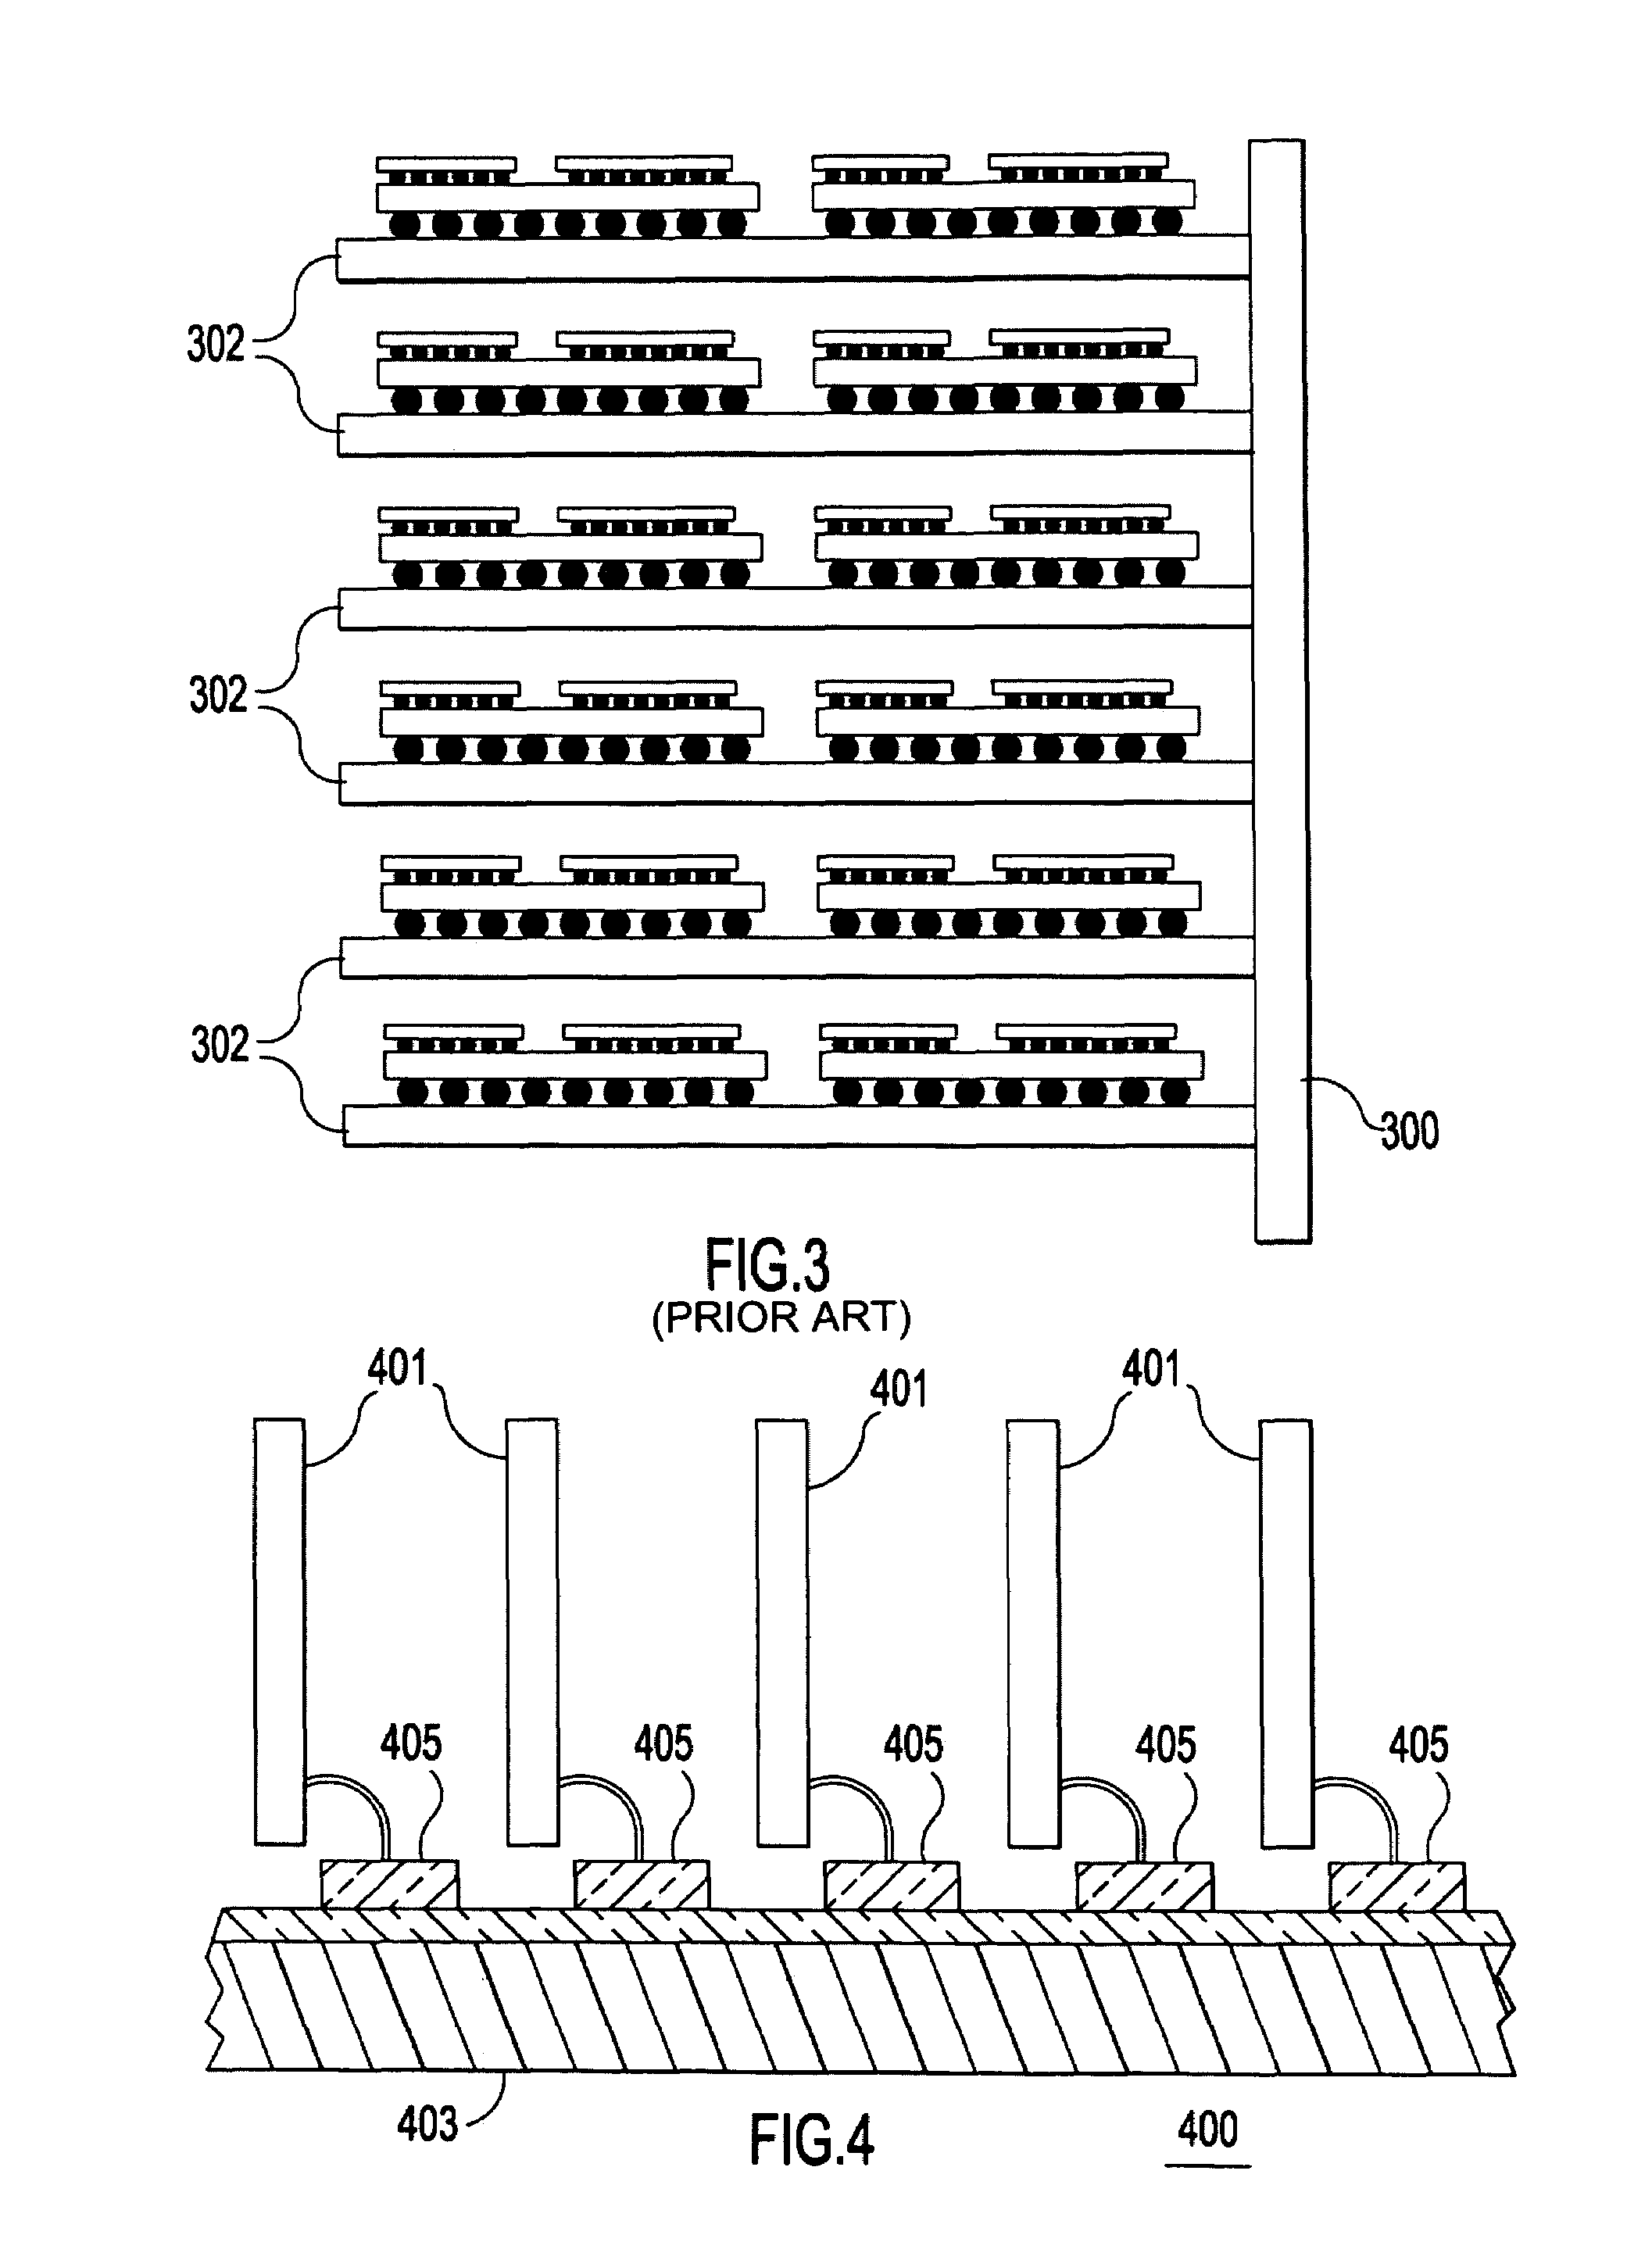 Optically connectable circuit board with optical component(s) mounted thereon